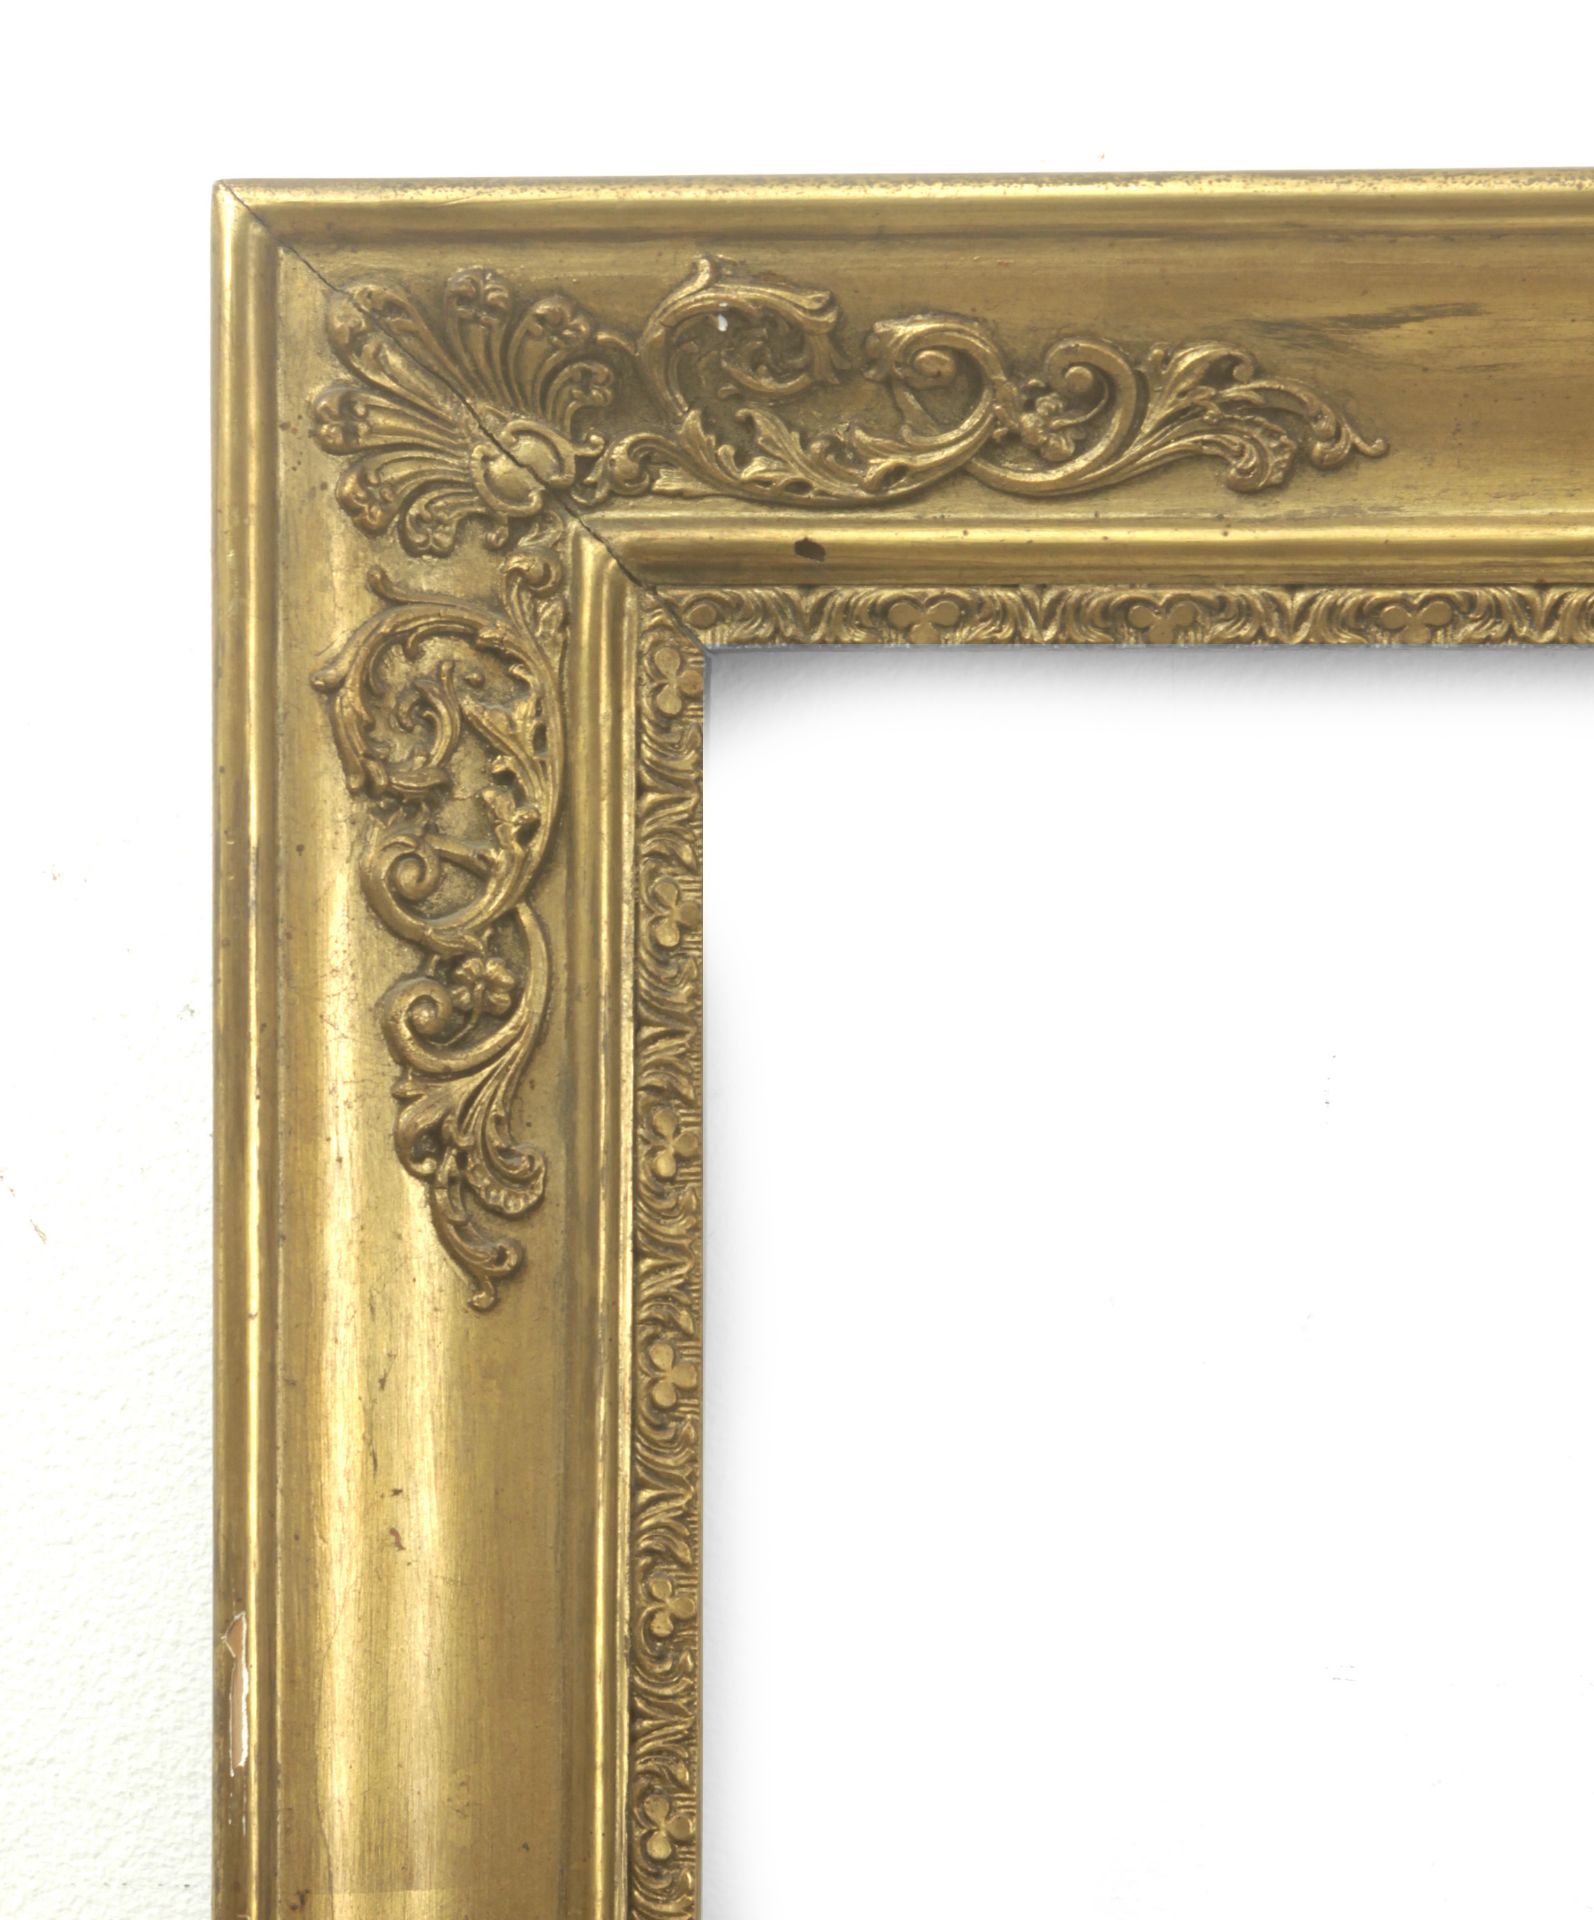 A 19th century frame - Image 2 of 2